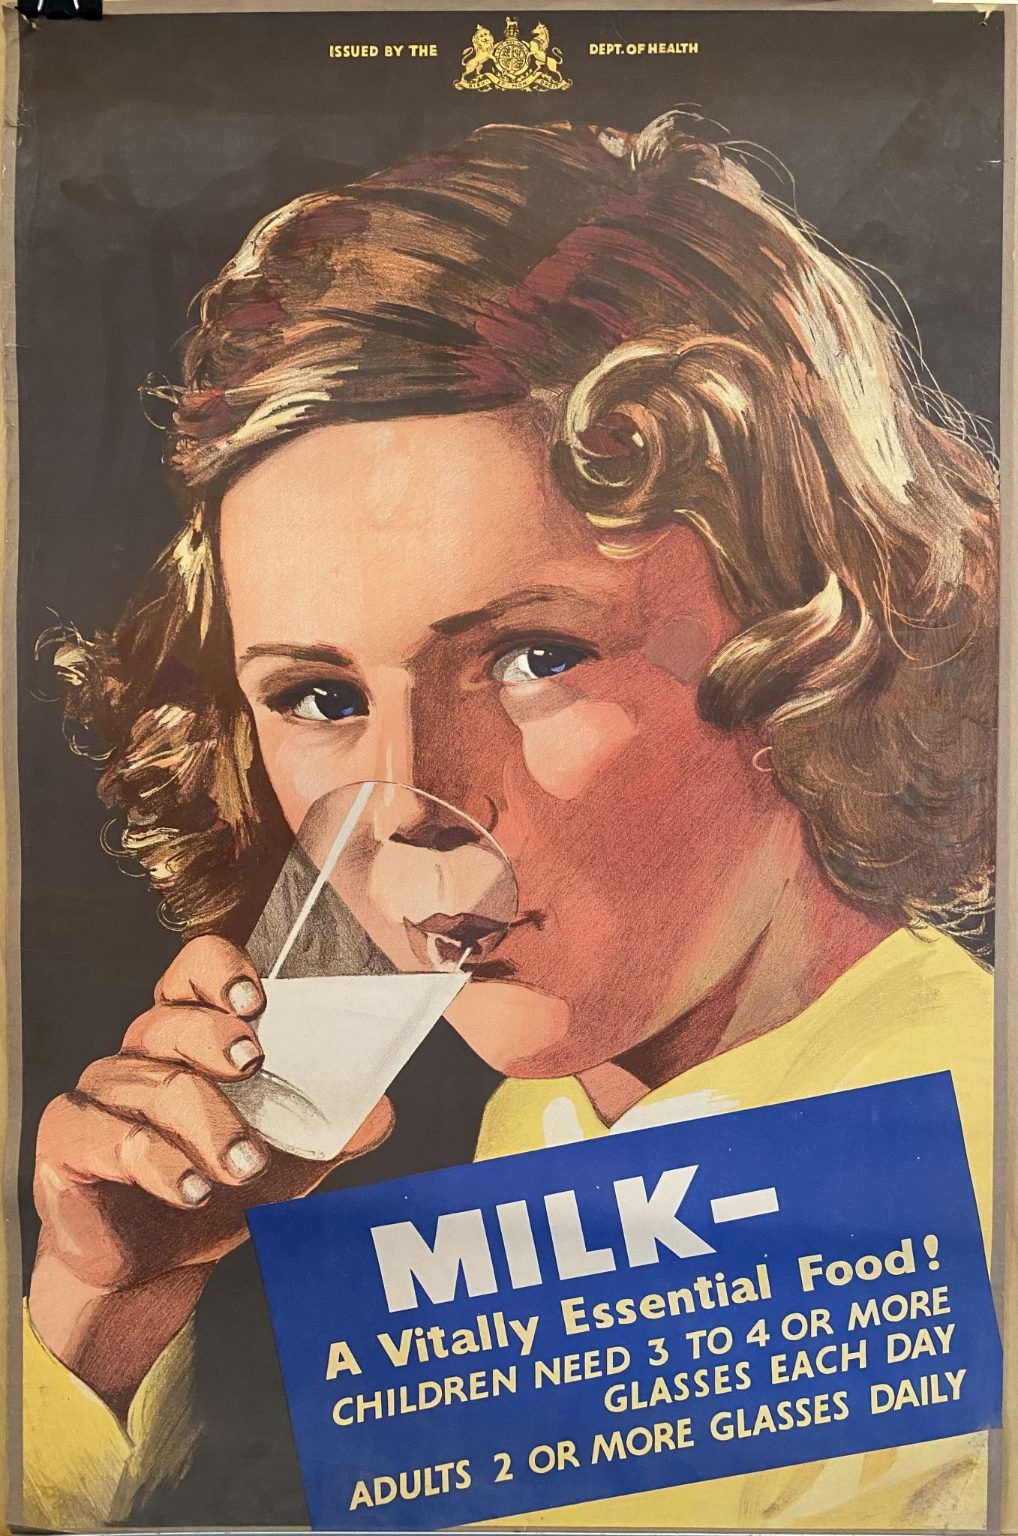 VINTAGE POSTER: New Zealand Department of Health / Milk - A Vitally Essential Food